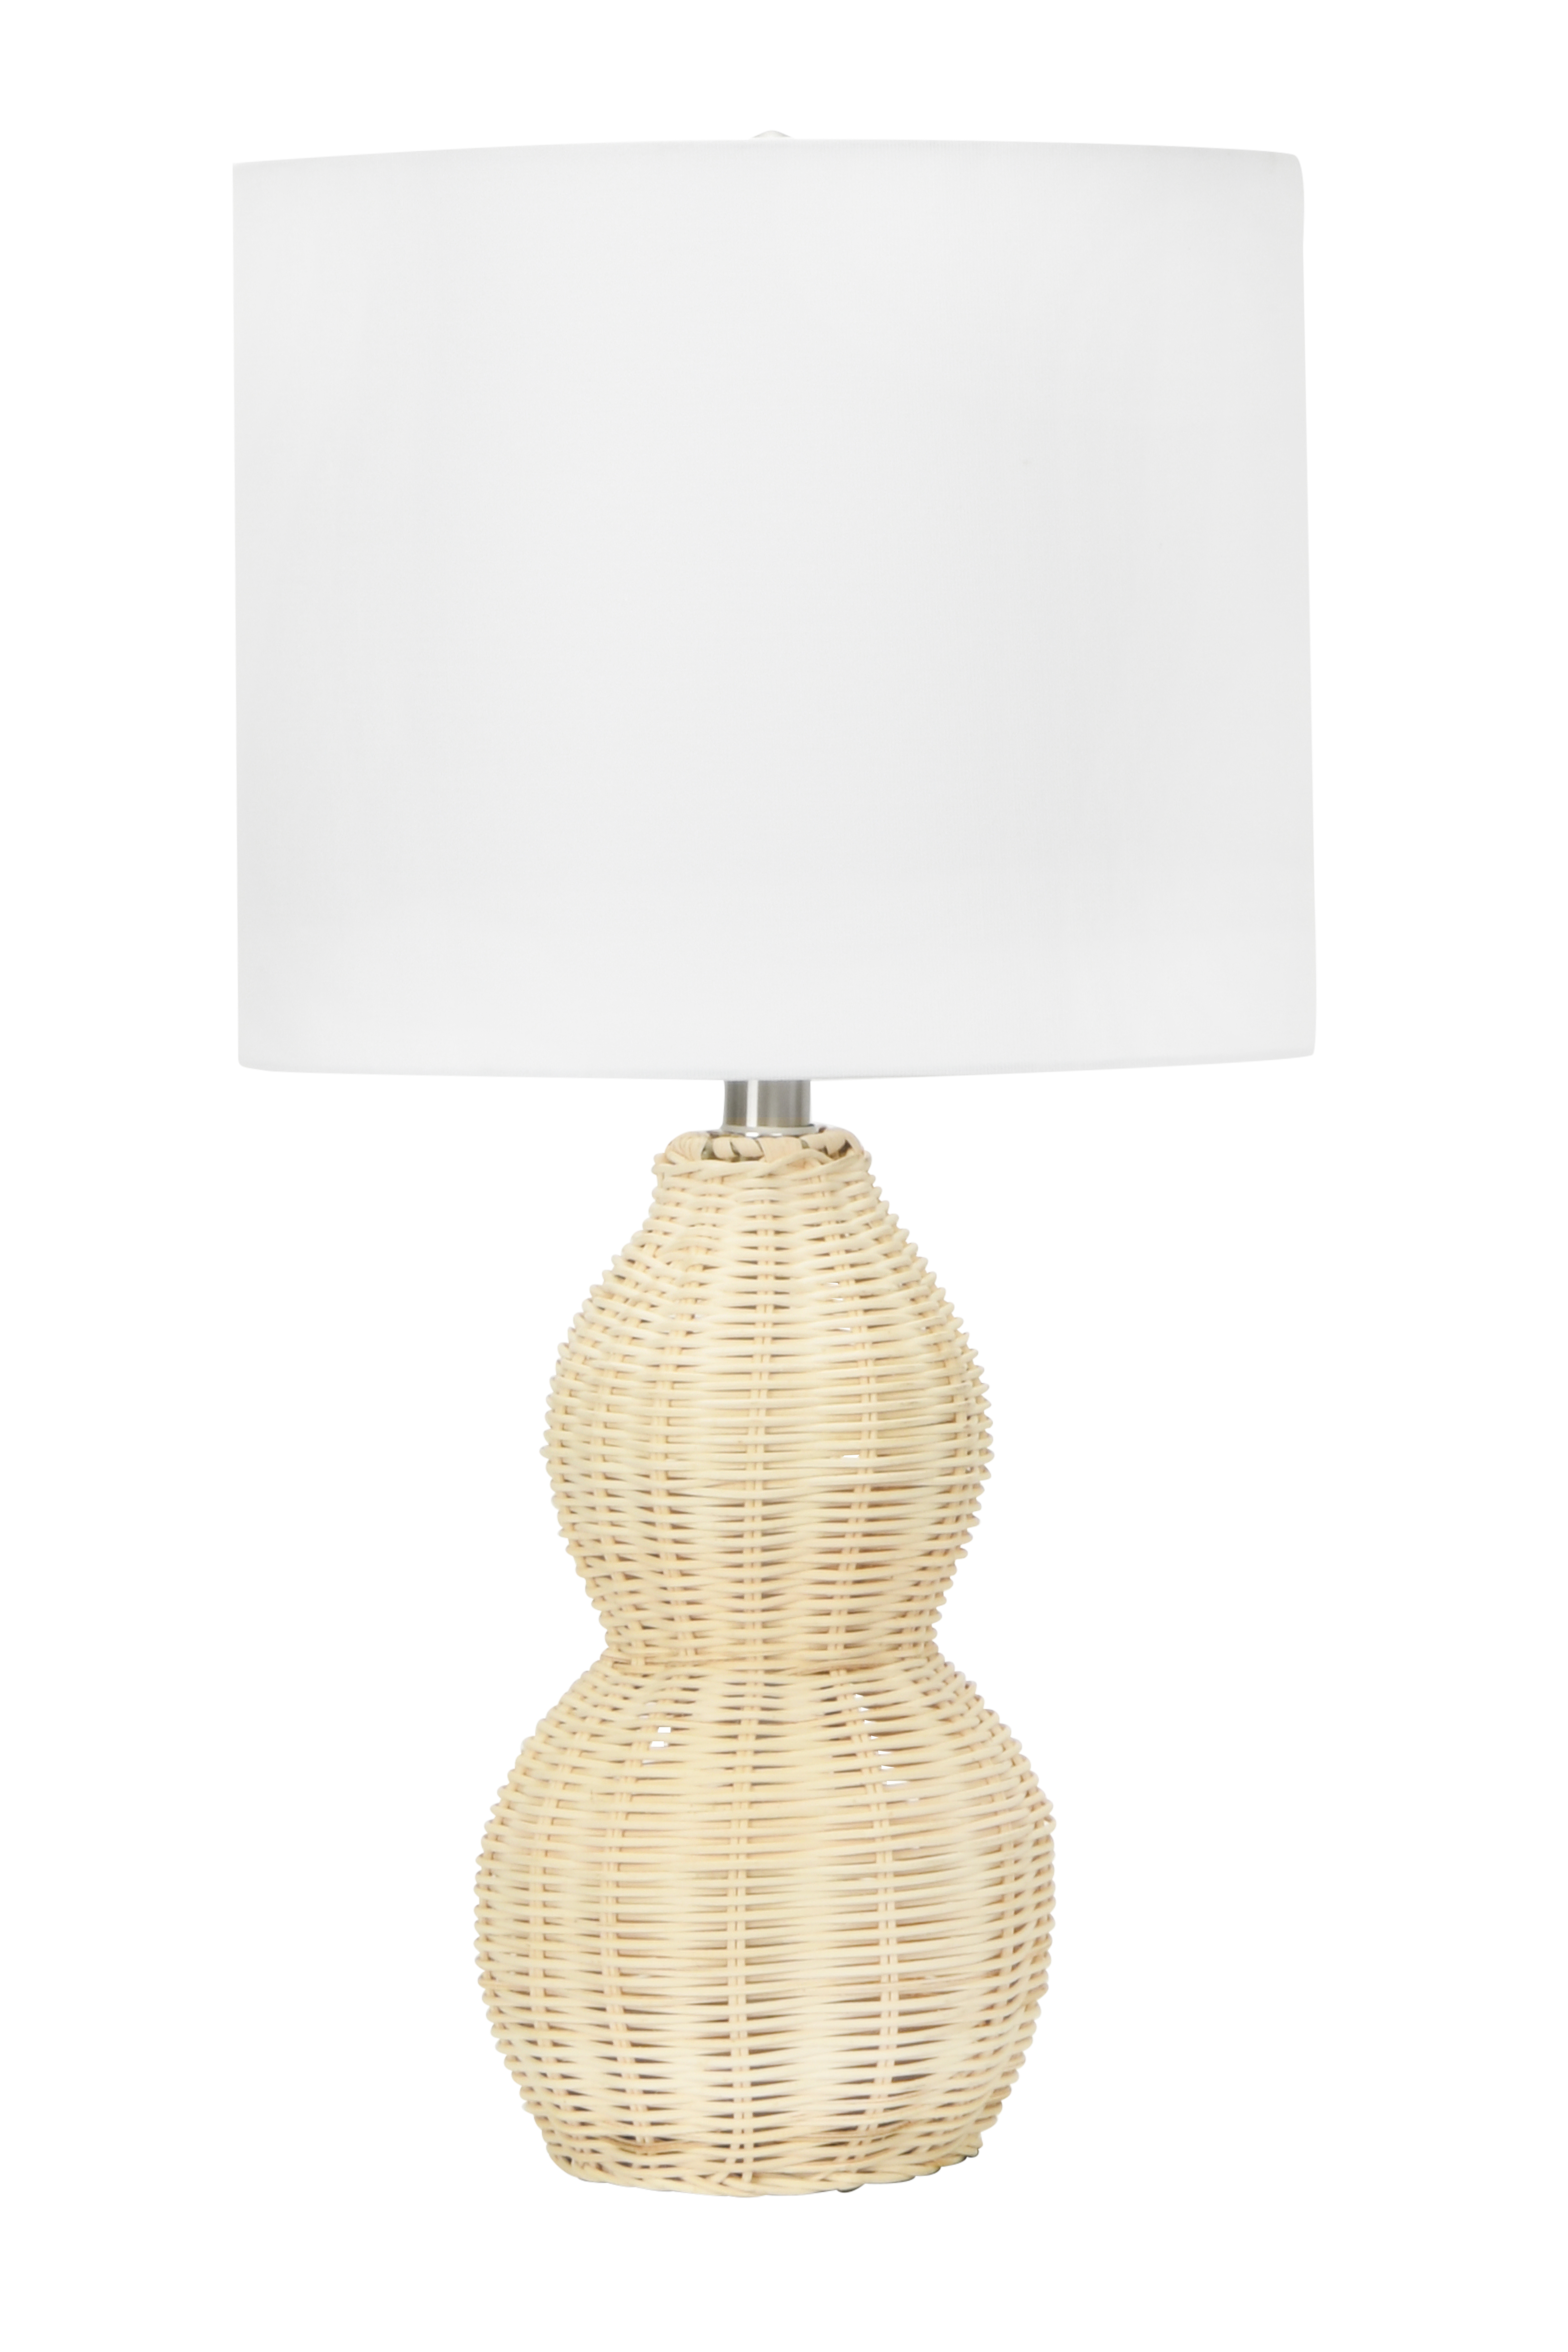 Gourd Shaped Rattan Table Lamp - Image 0